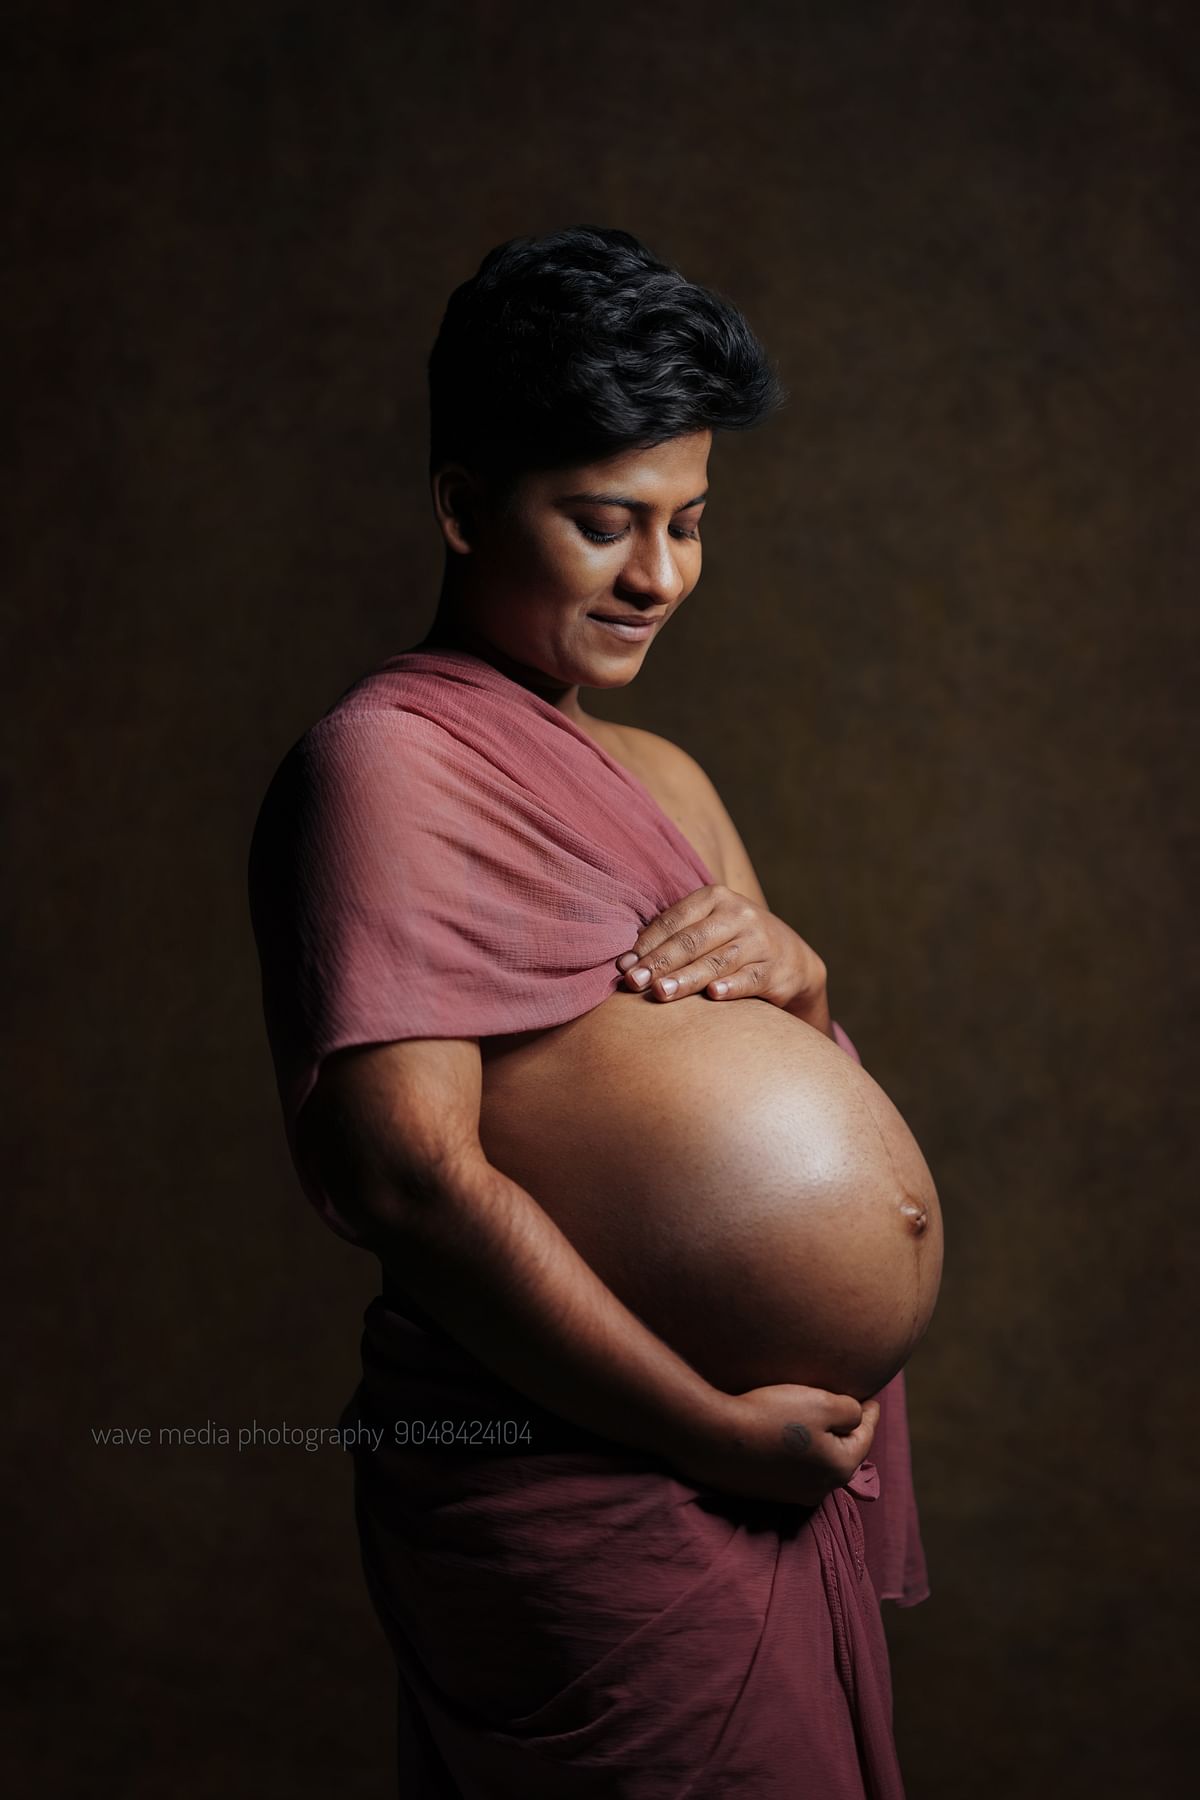 As someone who struggled with being labelled a woman all his life, the decision to be pregnant took a toll on Zahad.